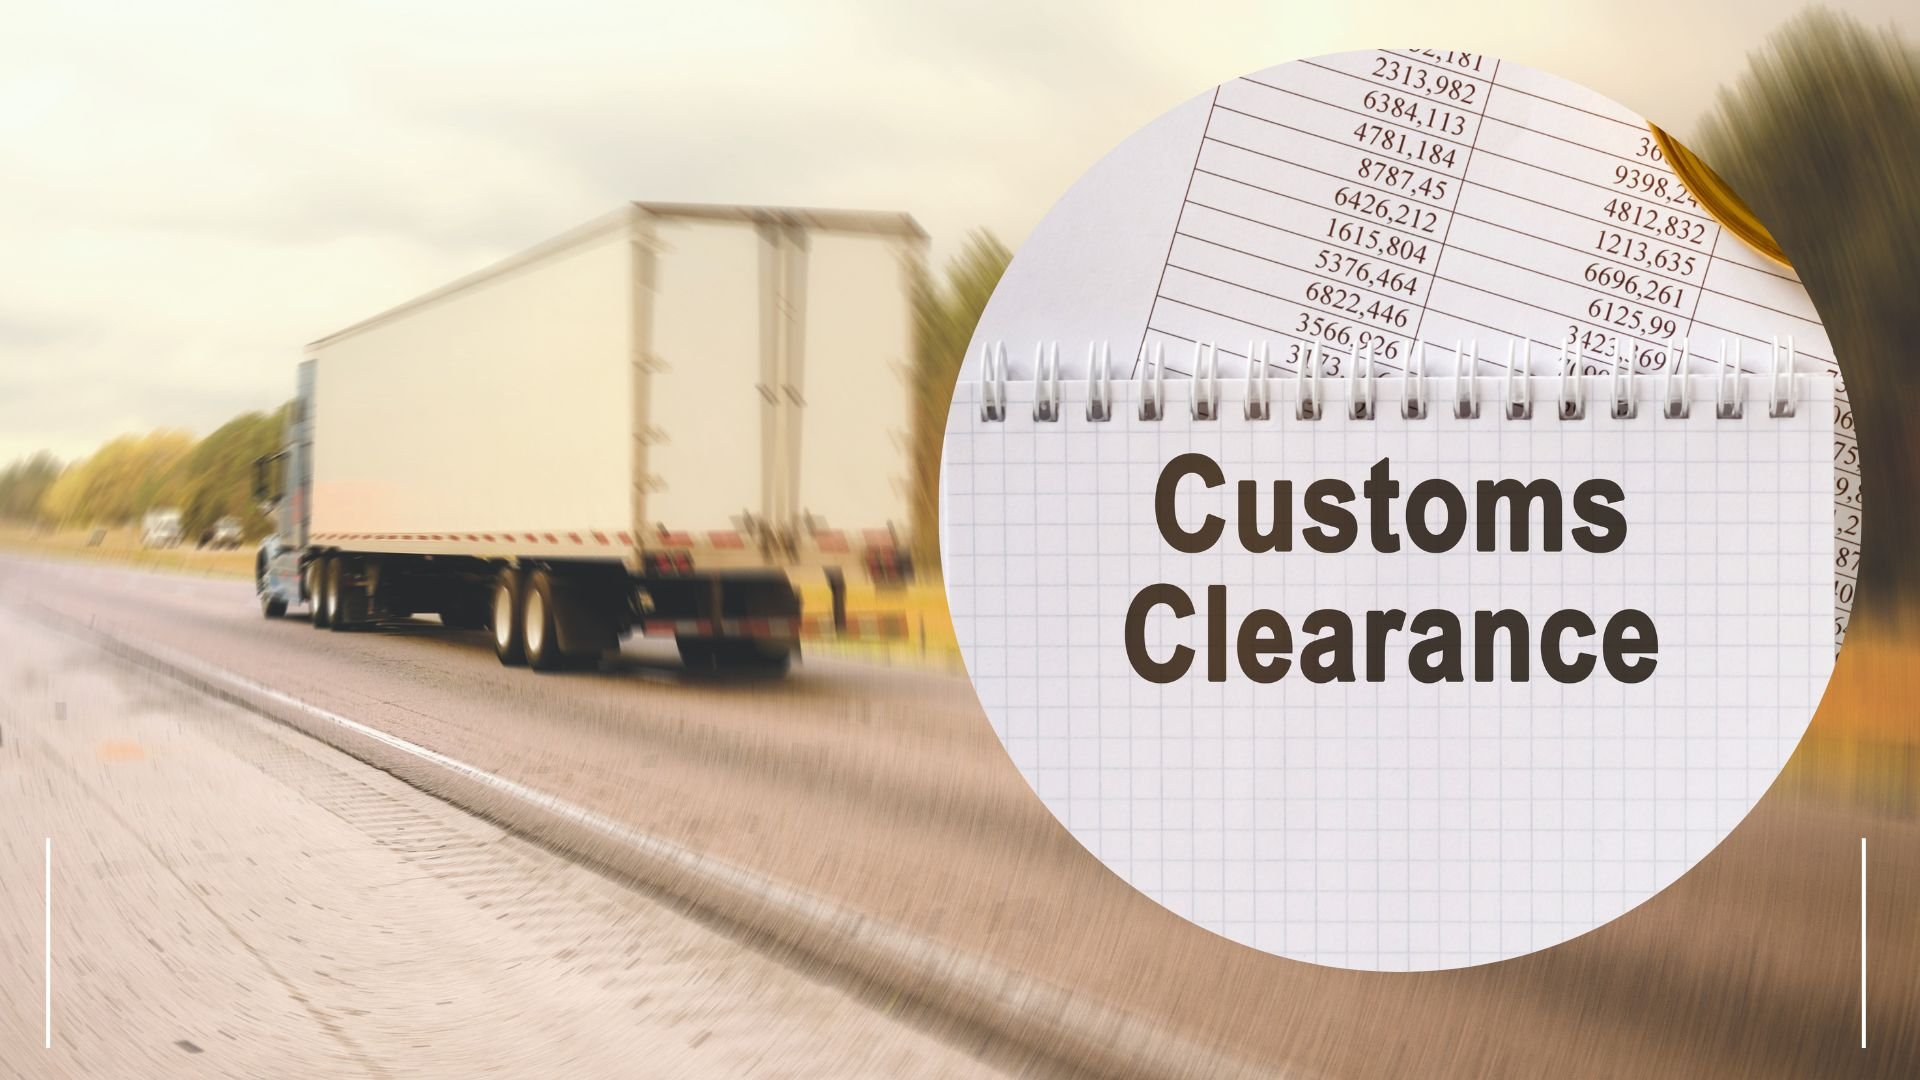 customs clearance tips avoid these common customs errors which can lead to delay, us canada, mexico